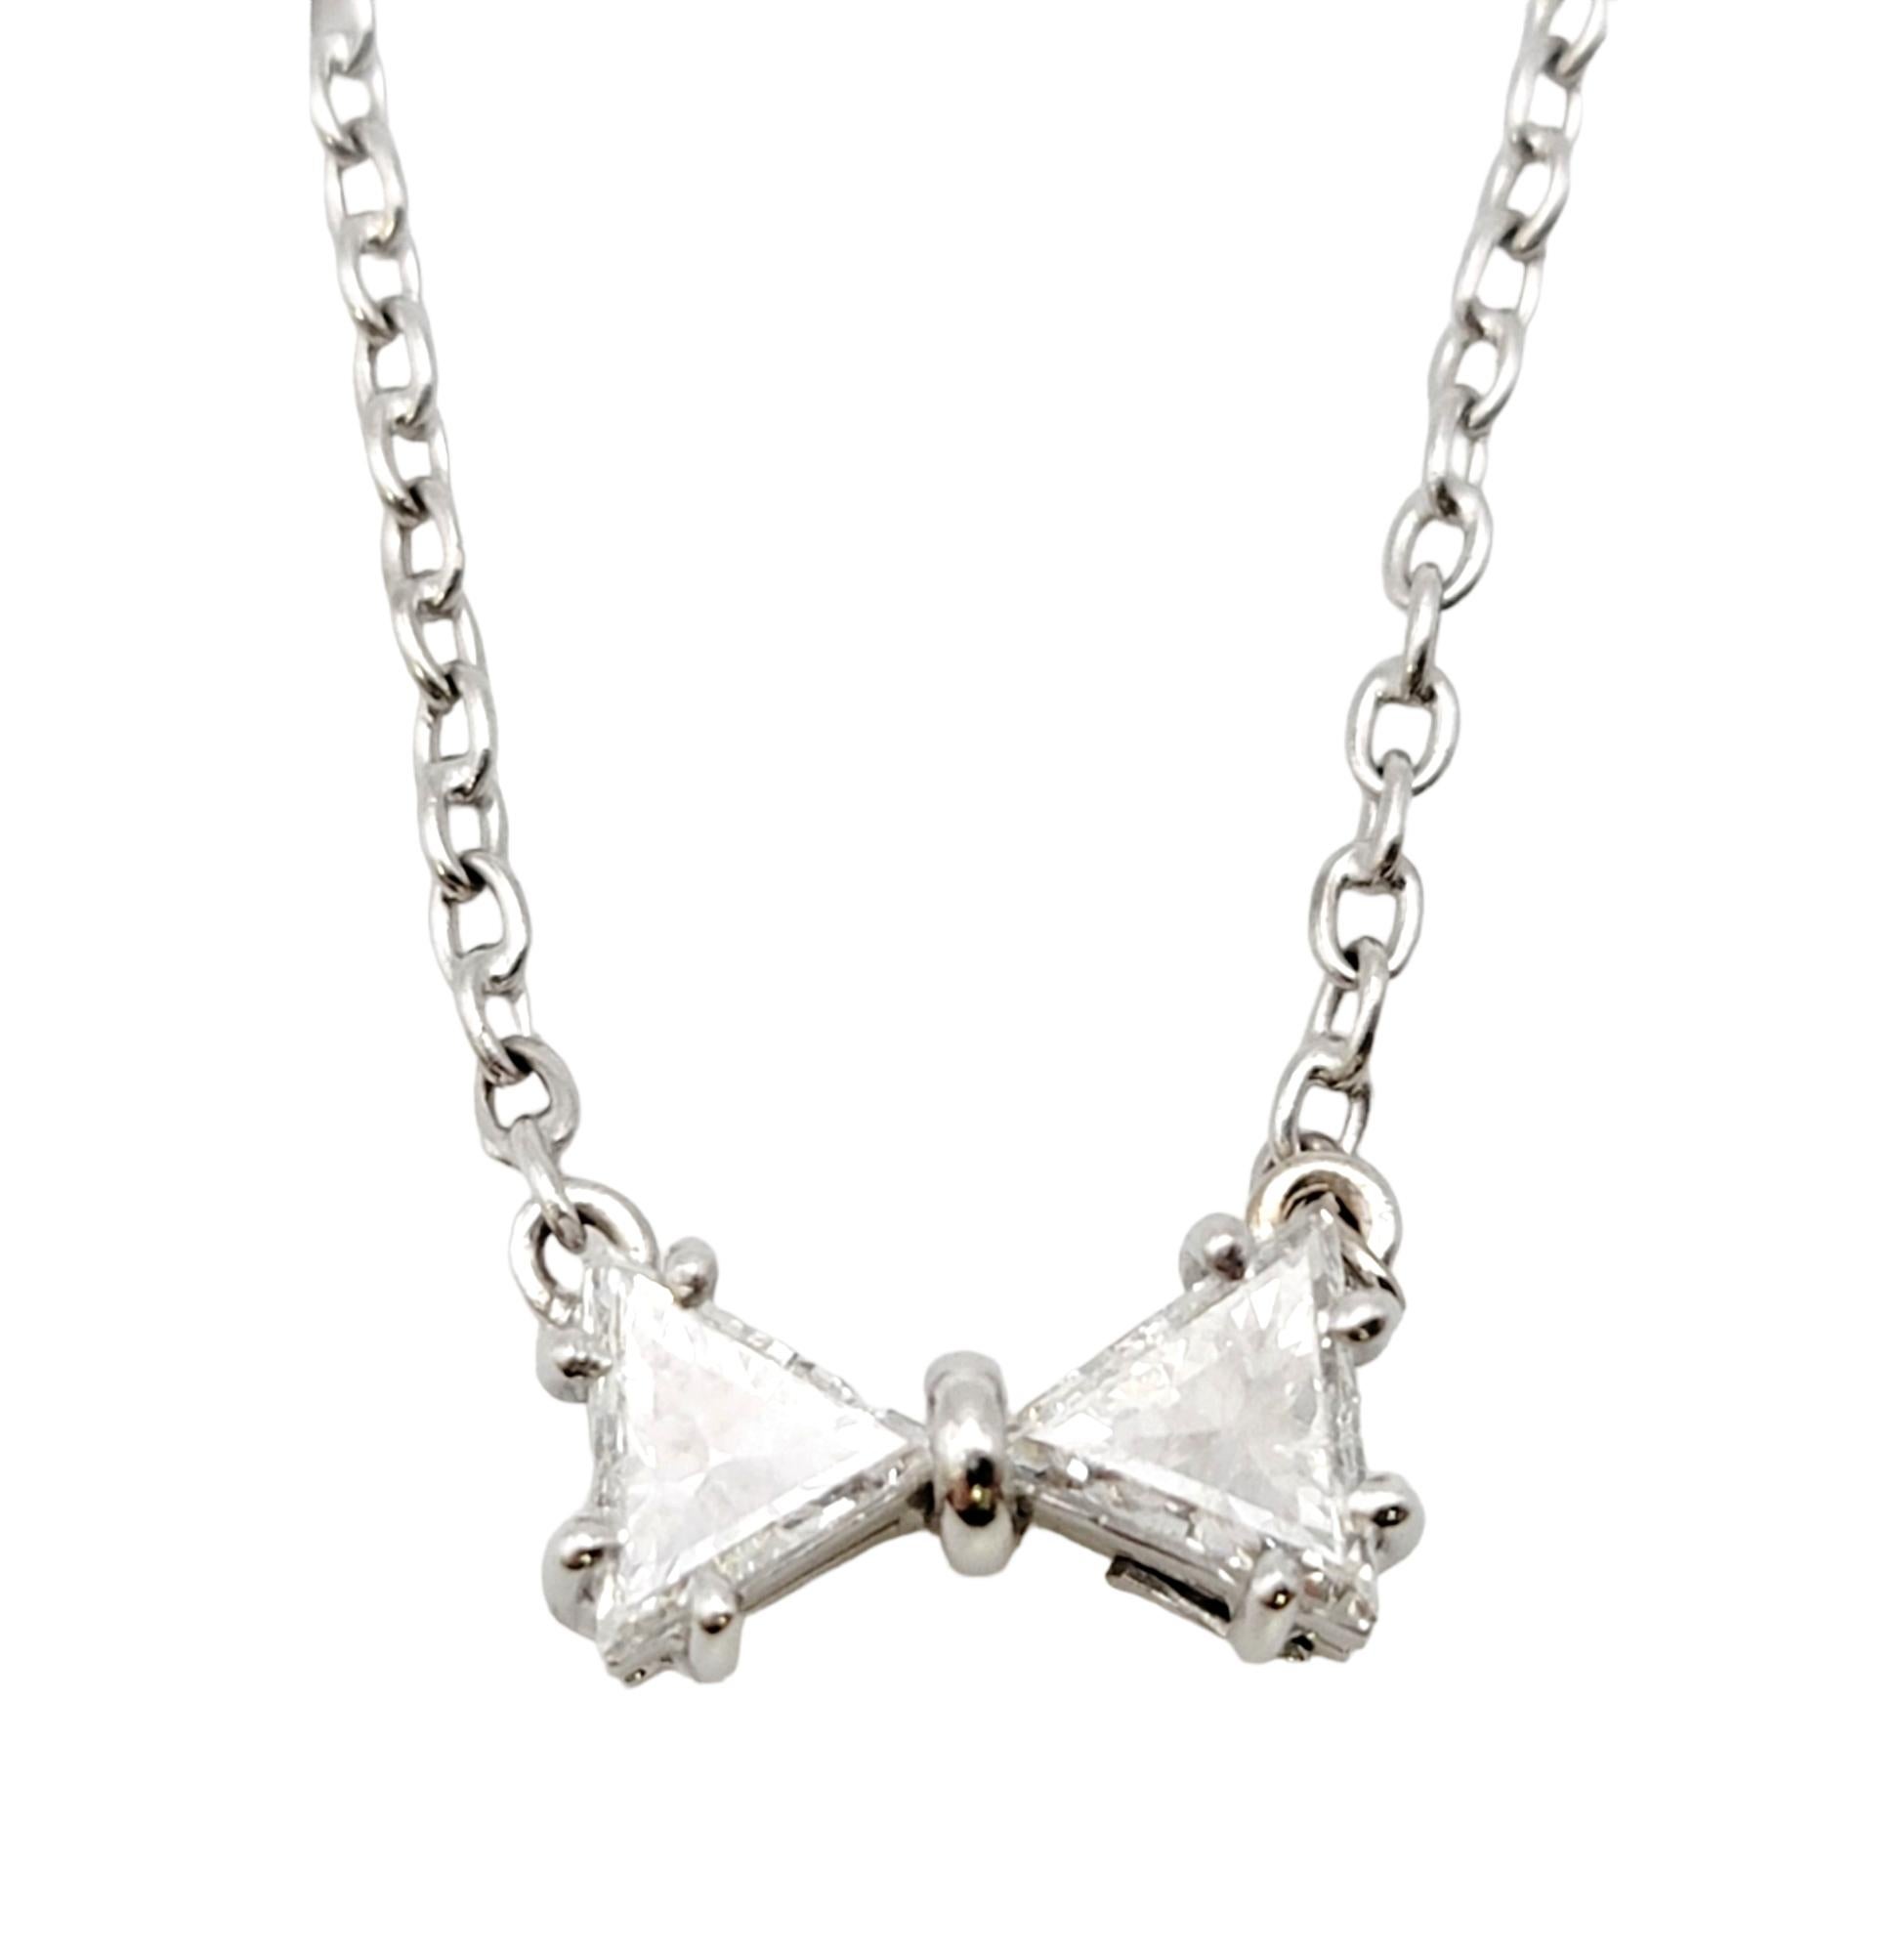 This adorable diamond bowtie pendant necklace is the perfect addition to any look! Dainty, playful and classic, this sparkling necklace will add an understated touch of glitz and glamour to your everyday life.  

Featuring an 18 karat white gold